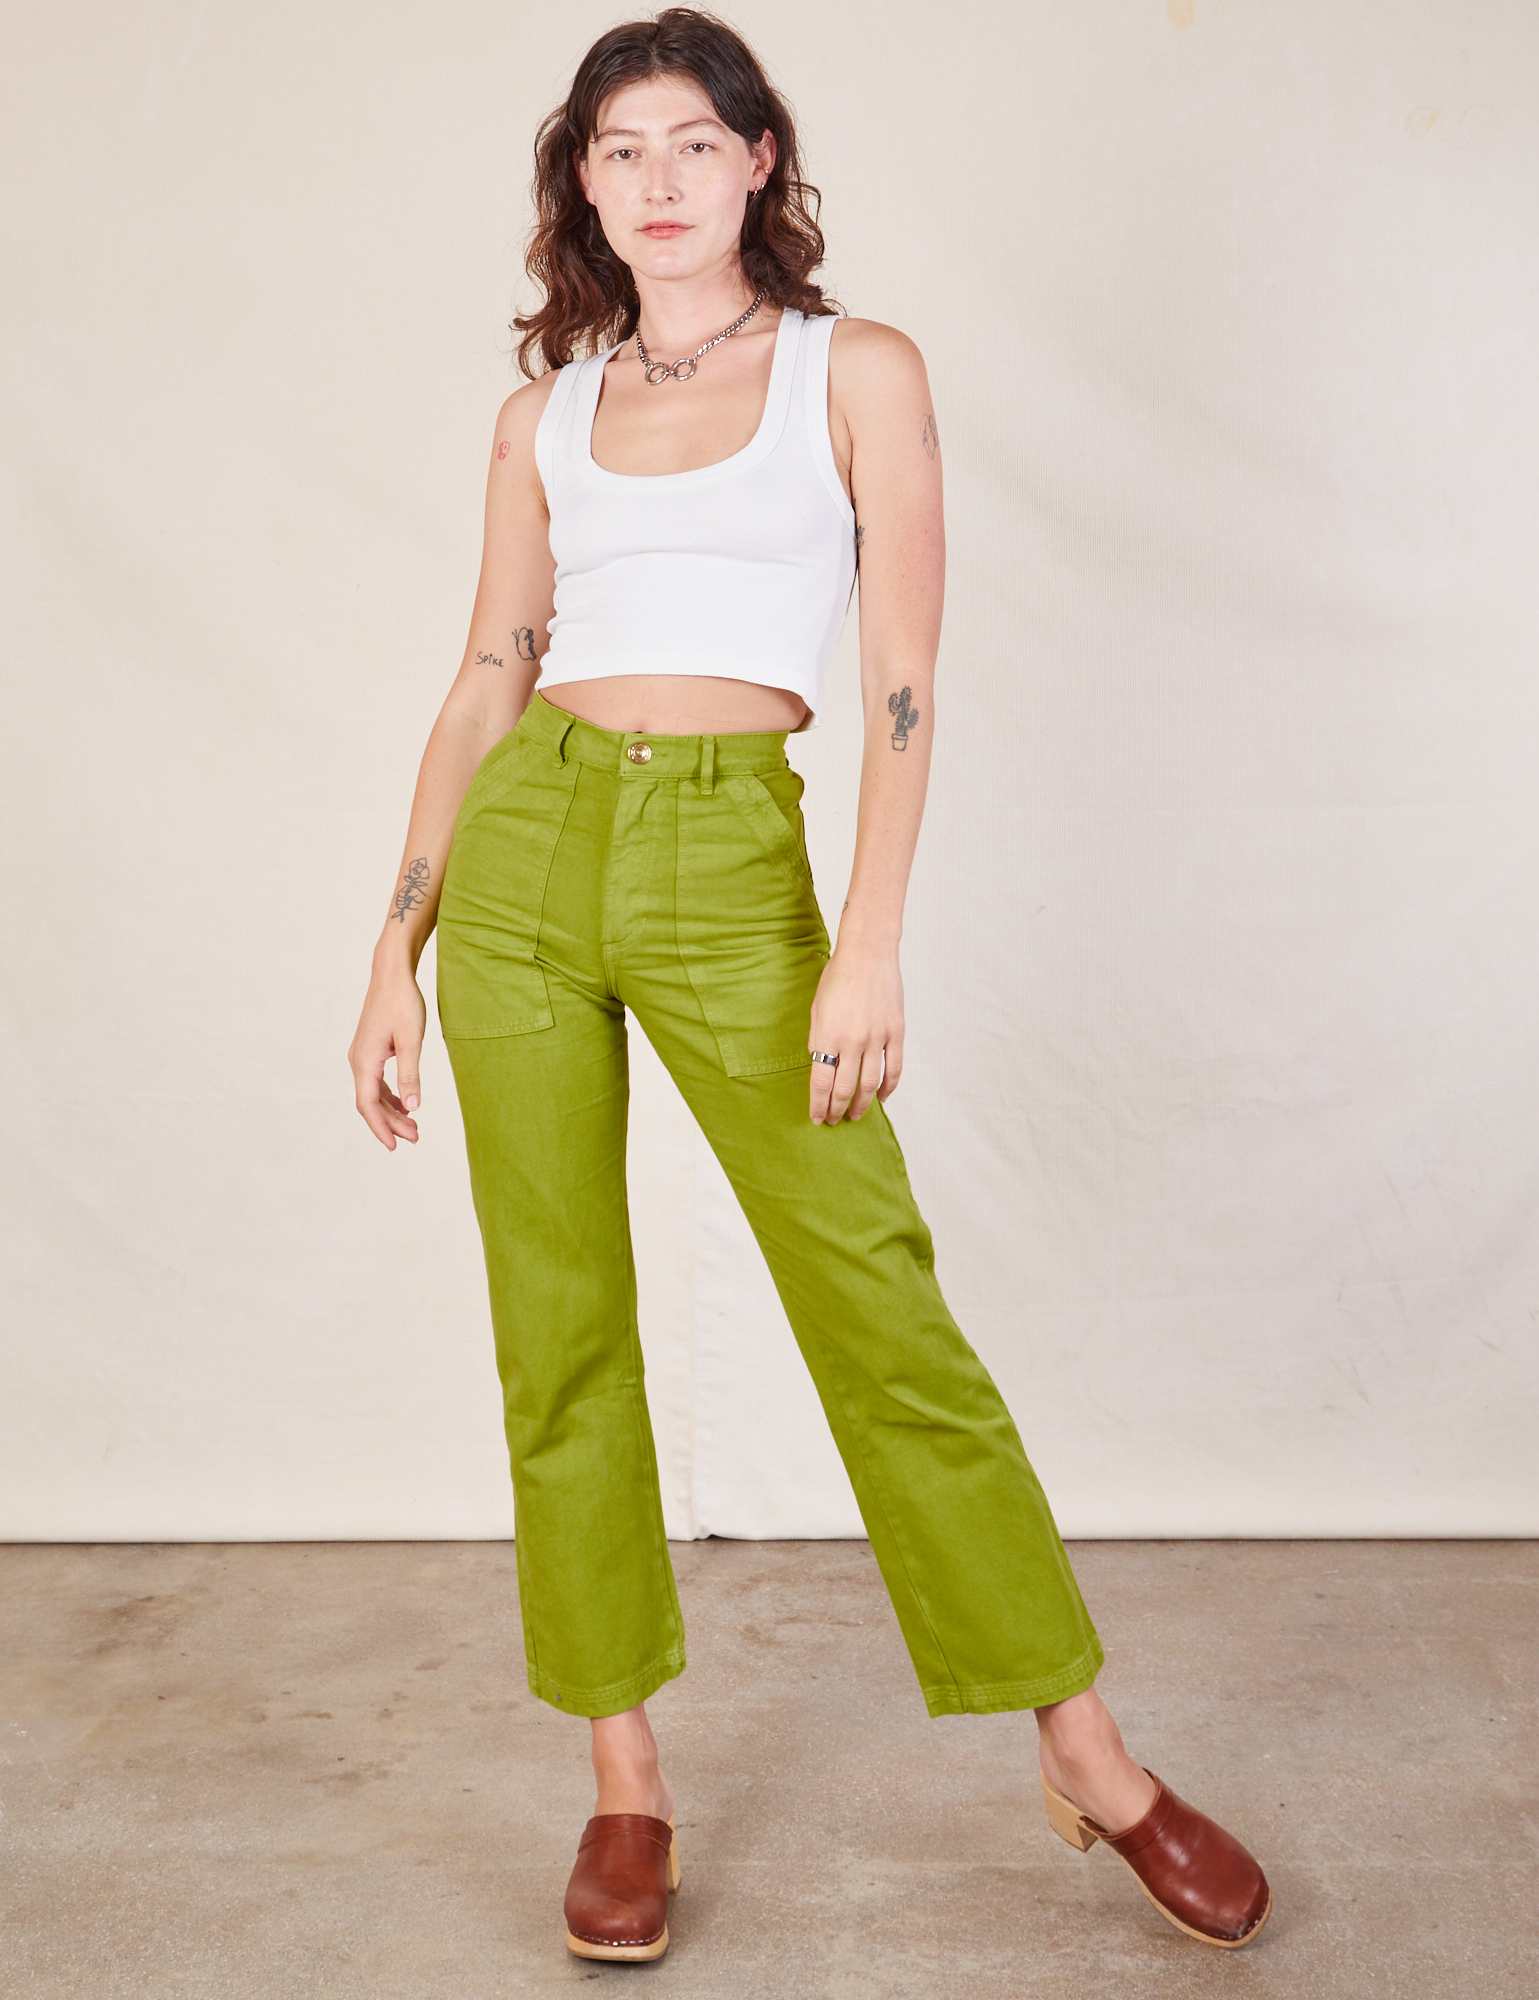 Alex is 5'8" and wearing XXS Work Pants in Gross Green paired with a Cropped Tank in vintage tee off-white